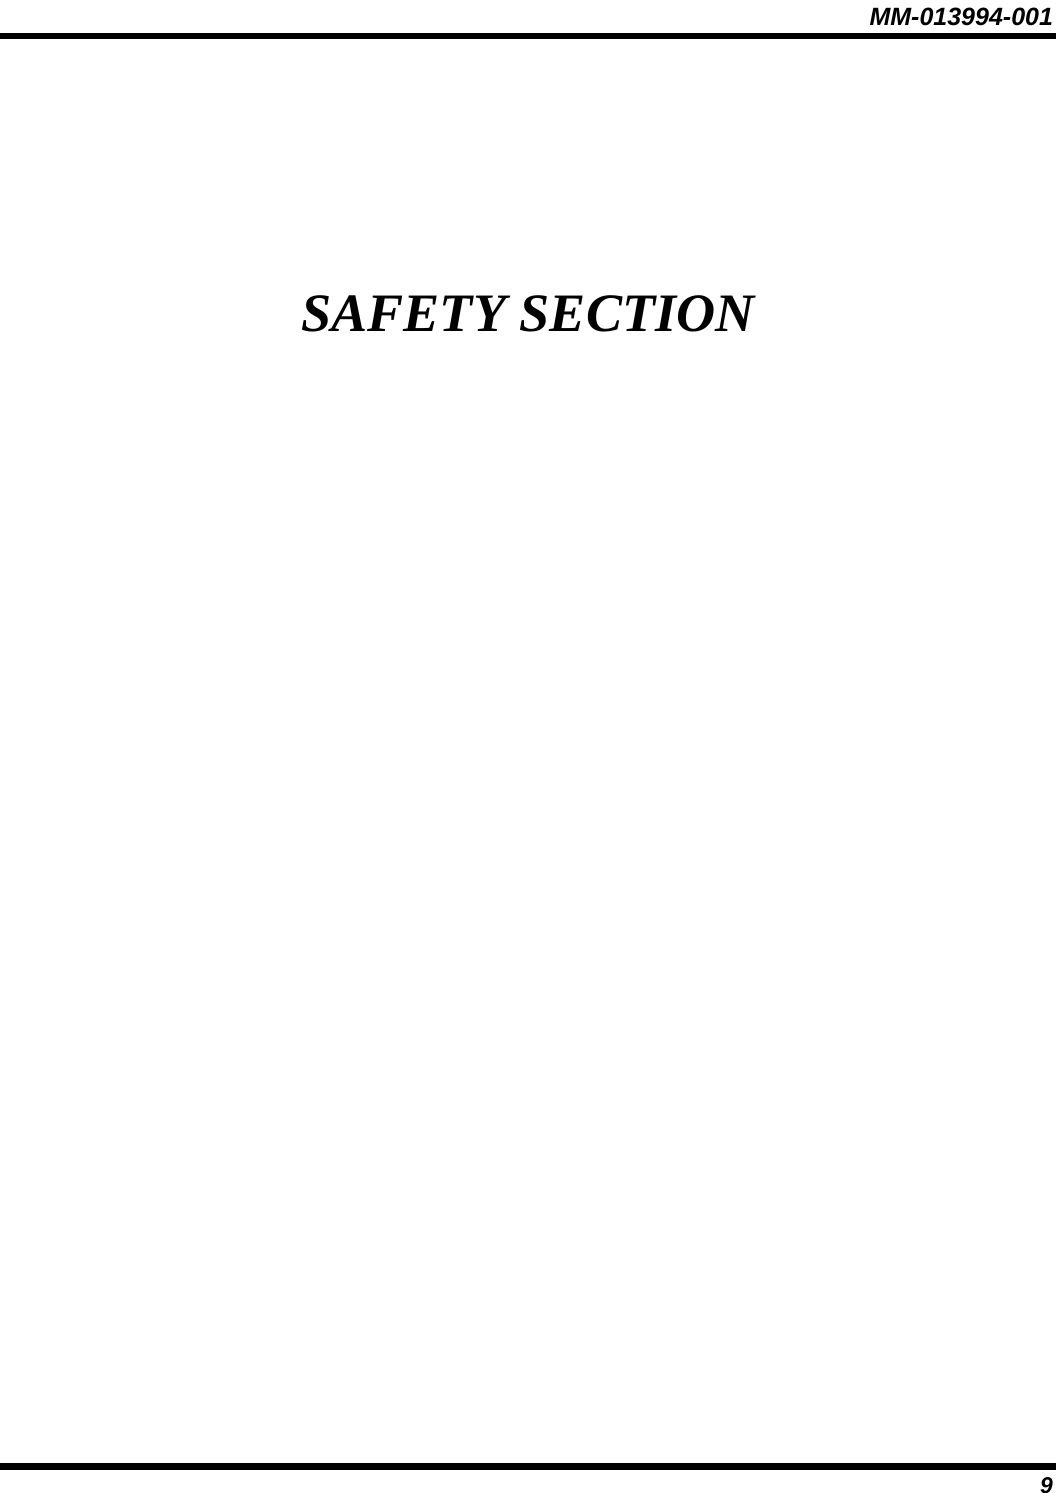 MM-013994-001 9 SAFETY SECTION 